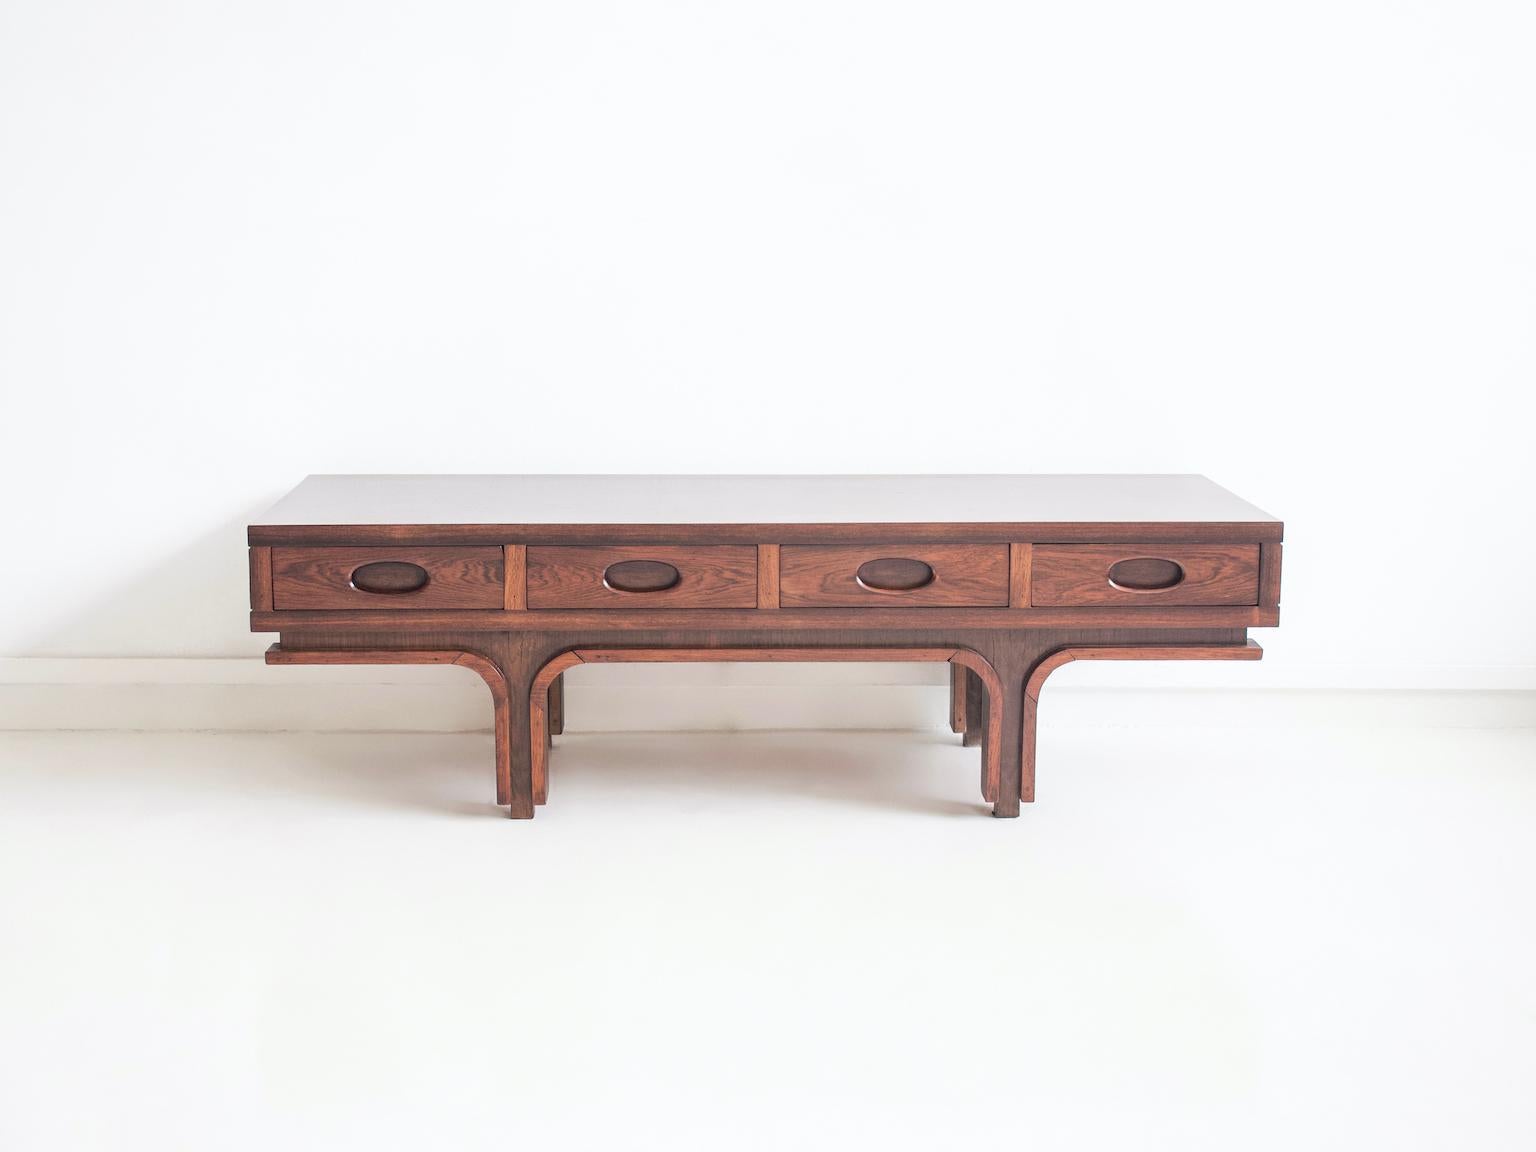 Coffee table made of solid and veneered hardwood in the 1960s. Design by Gianfranco Frattini, manufactured by Bernini in Italy. Four drawers with built-in handles.

Literature: James P. Morris 'Il nuovo arredamento / New interiors', published by